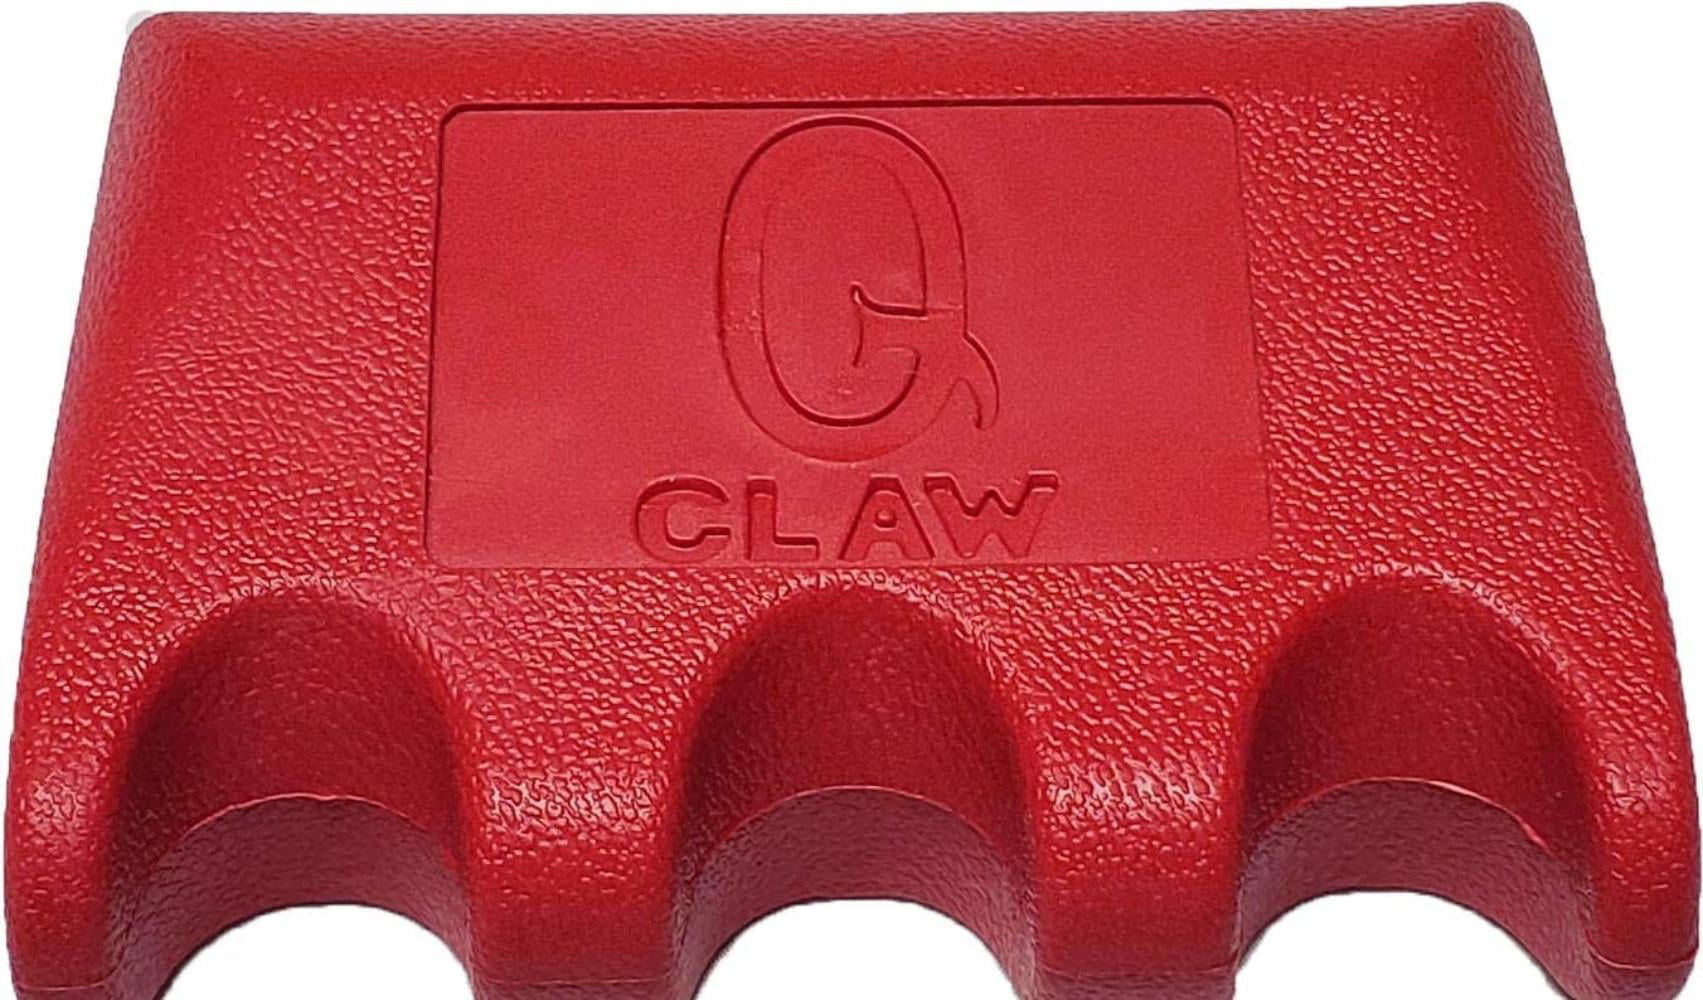 Red Q-Claw QCLAW Portable Pool/Billiards Cue Stick Holder/Rack 2 Place 